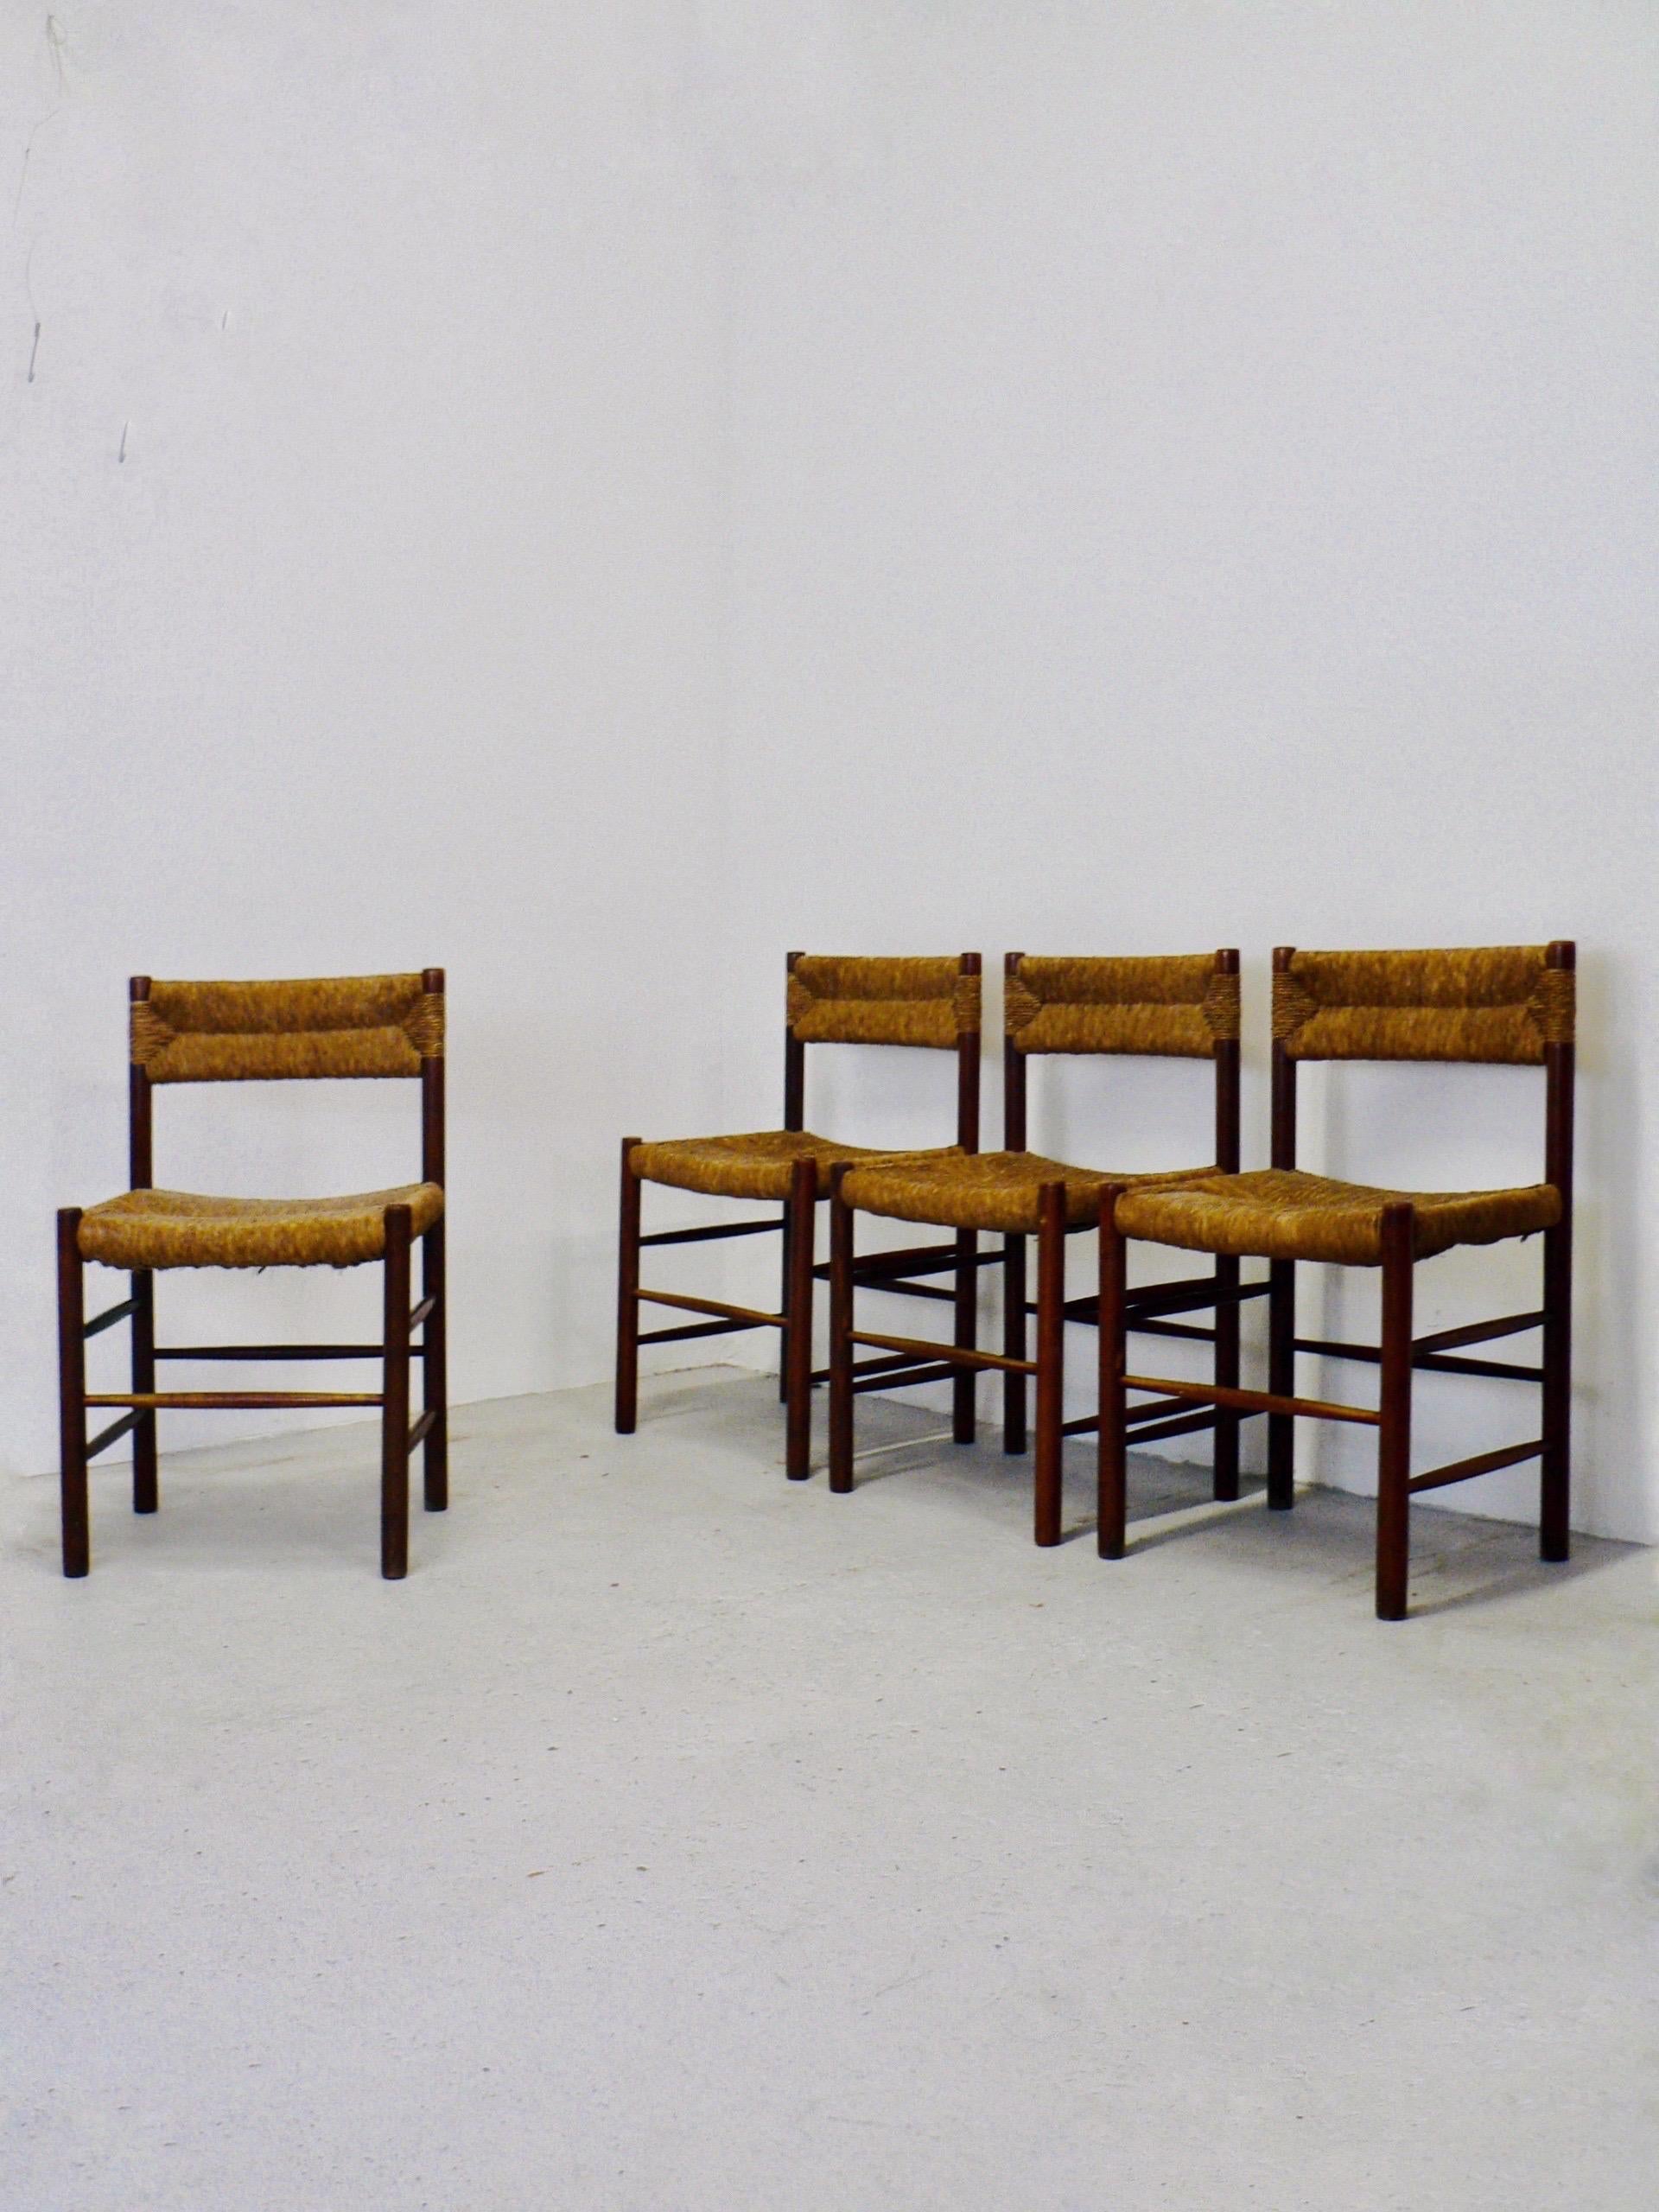 French Provincial 4 Robert Sentou Dordogne Chairs for Charlotte Perriand - 1950